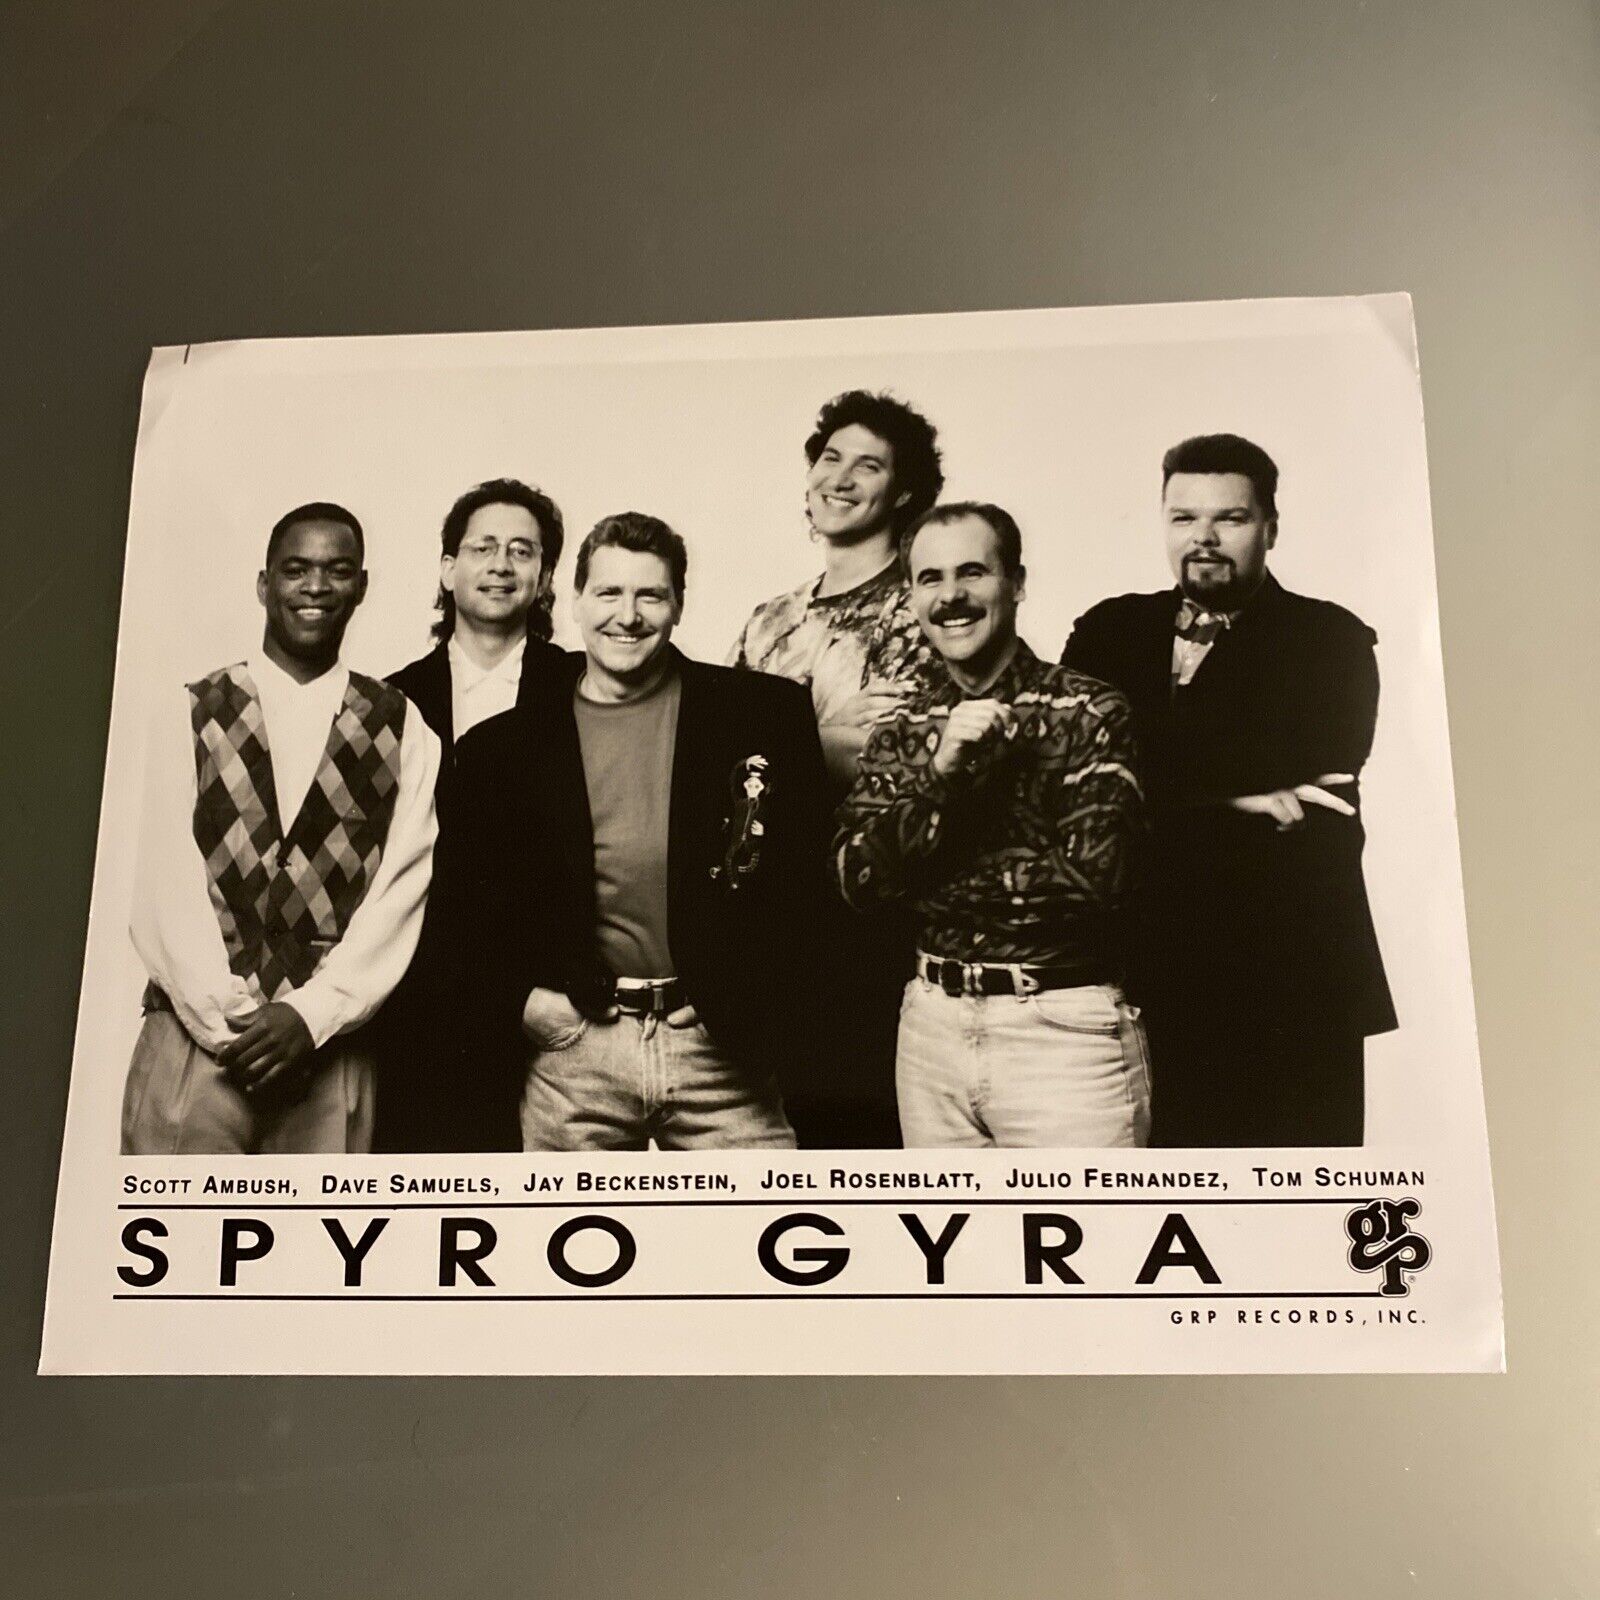 1990 Press Photo Members of the Spyro Gyra Band With Names Of Members